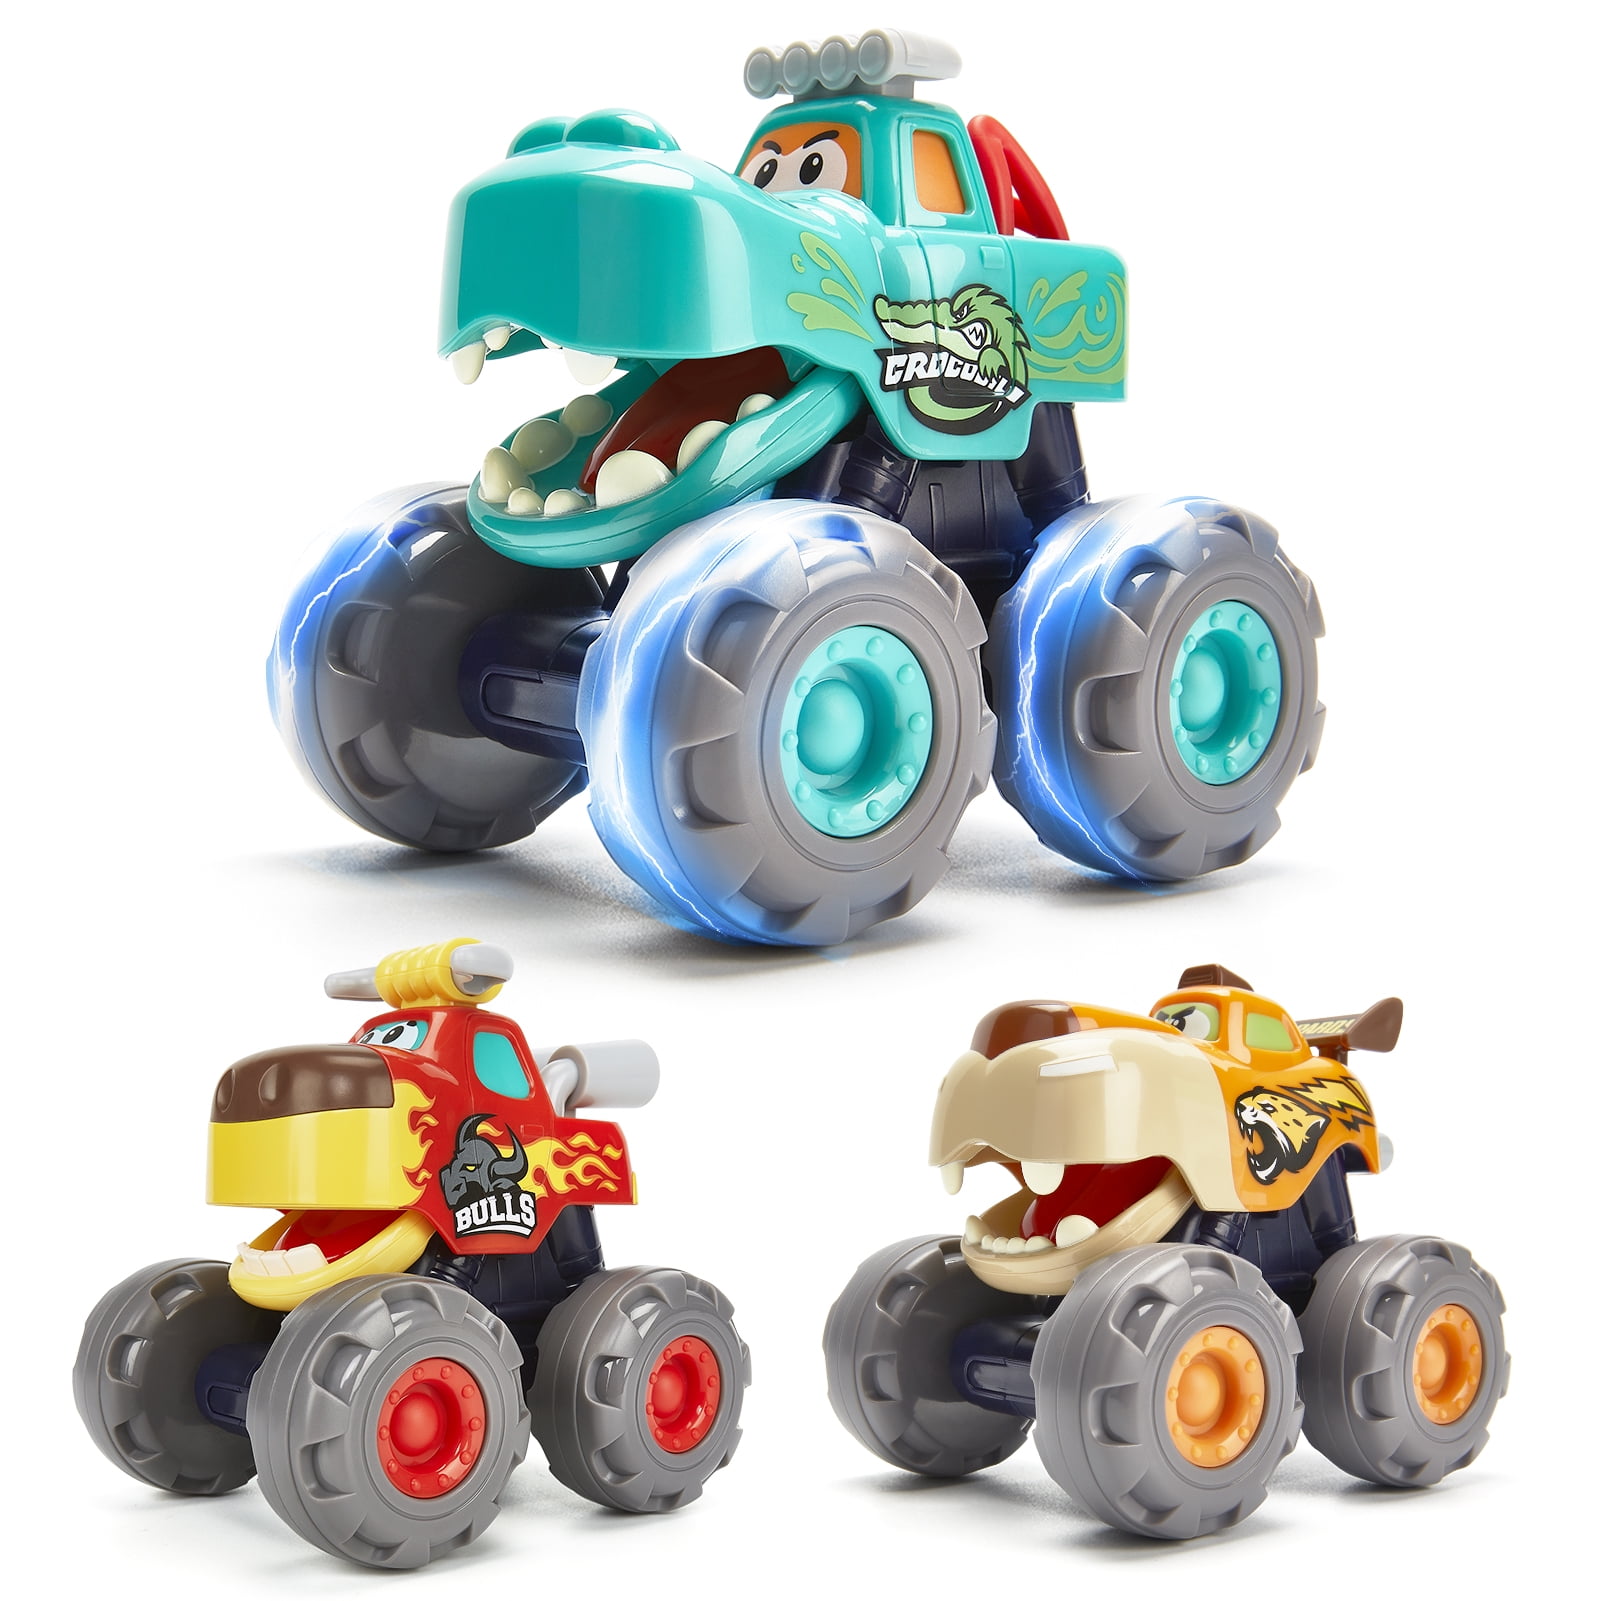 Friction Powered Cars for Boys and Toddlers Pull Back Cars for Boys Diecast Hot Wheels Trucks 1:36 Scale 2 Pack Pull Back Vehicle with High Speed af-tigonhw Pull Back Trucks 